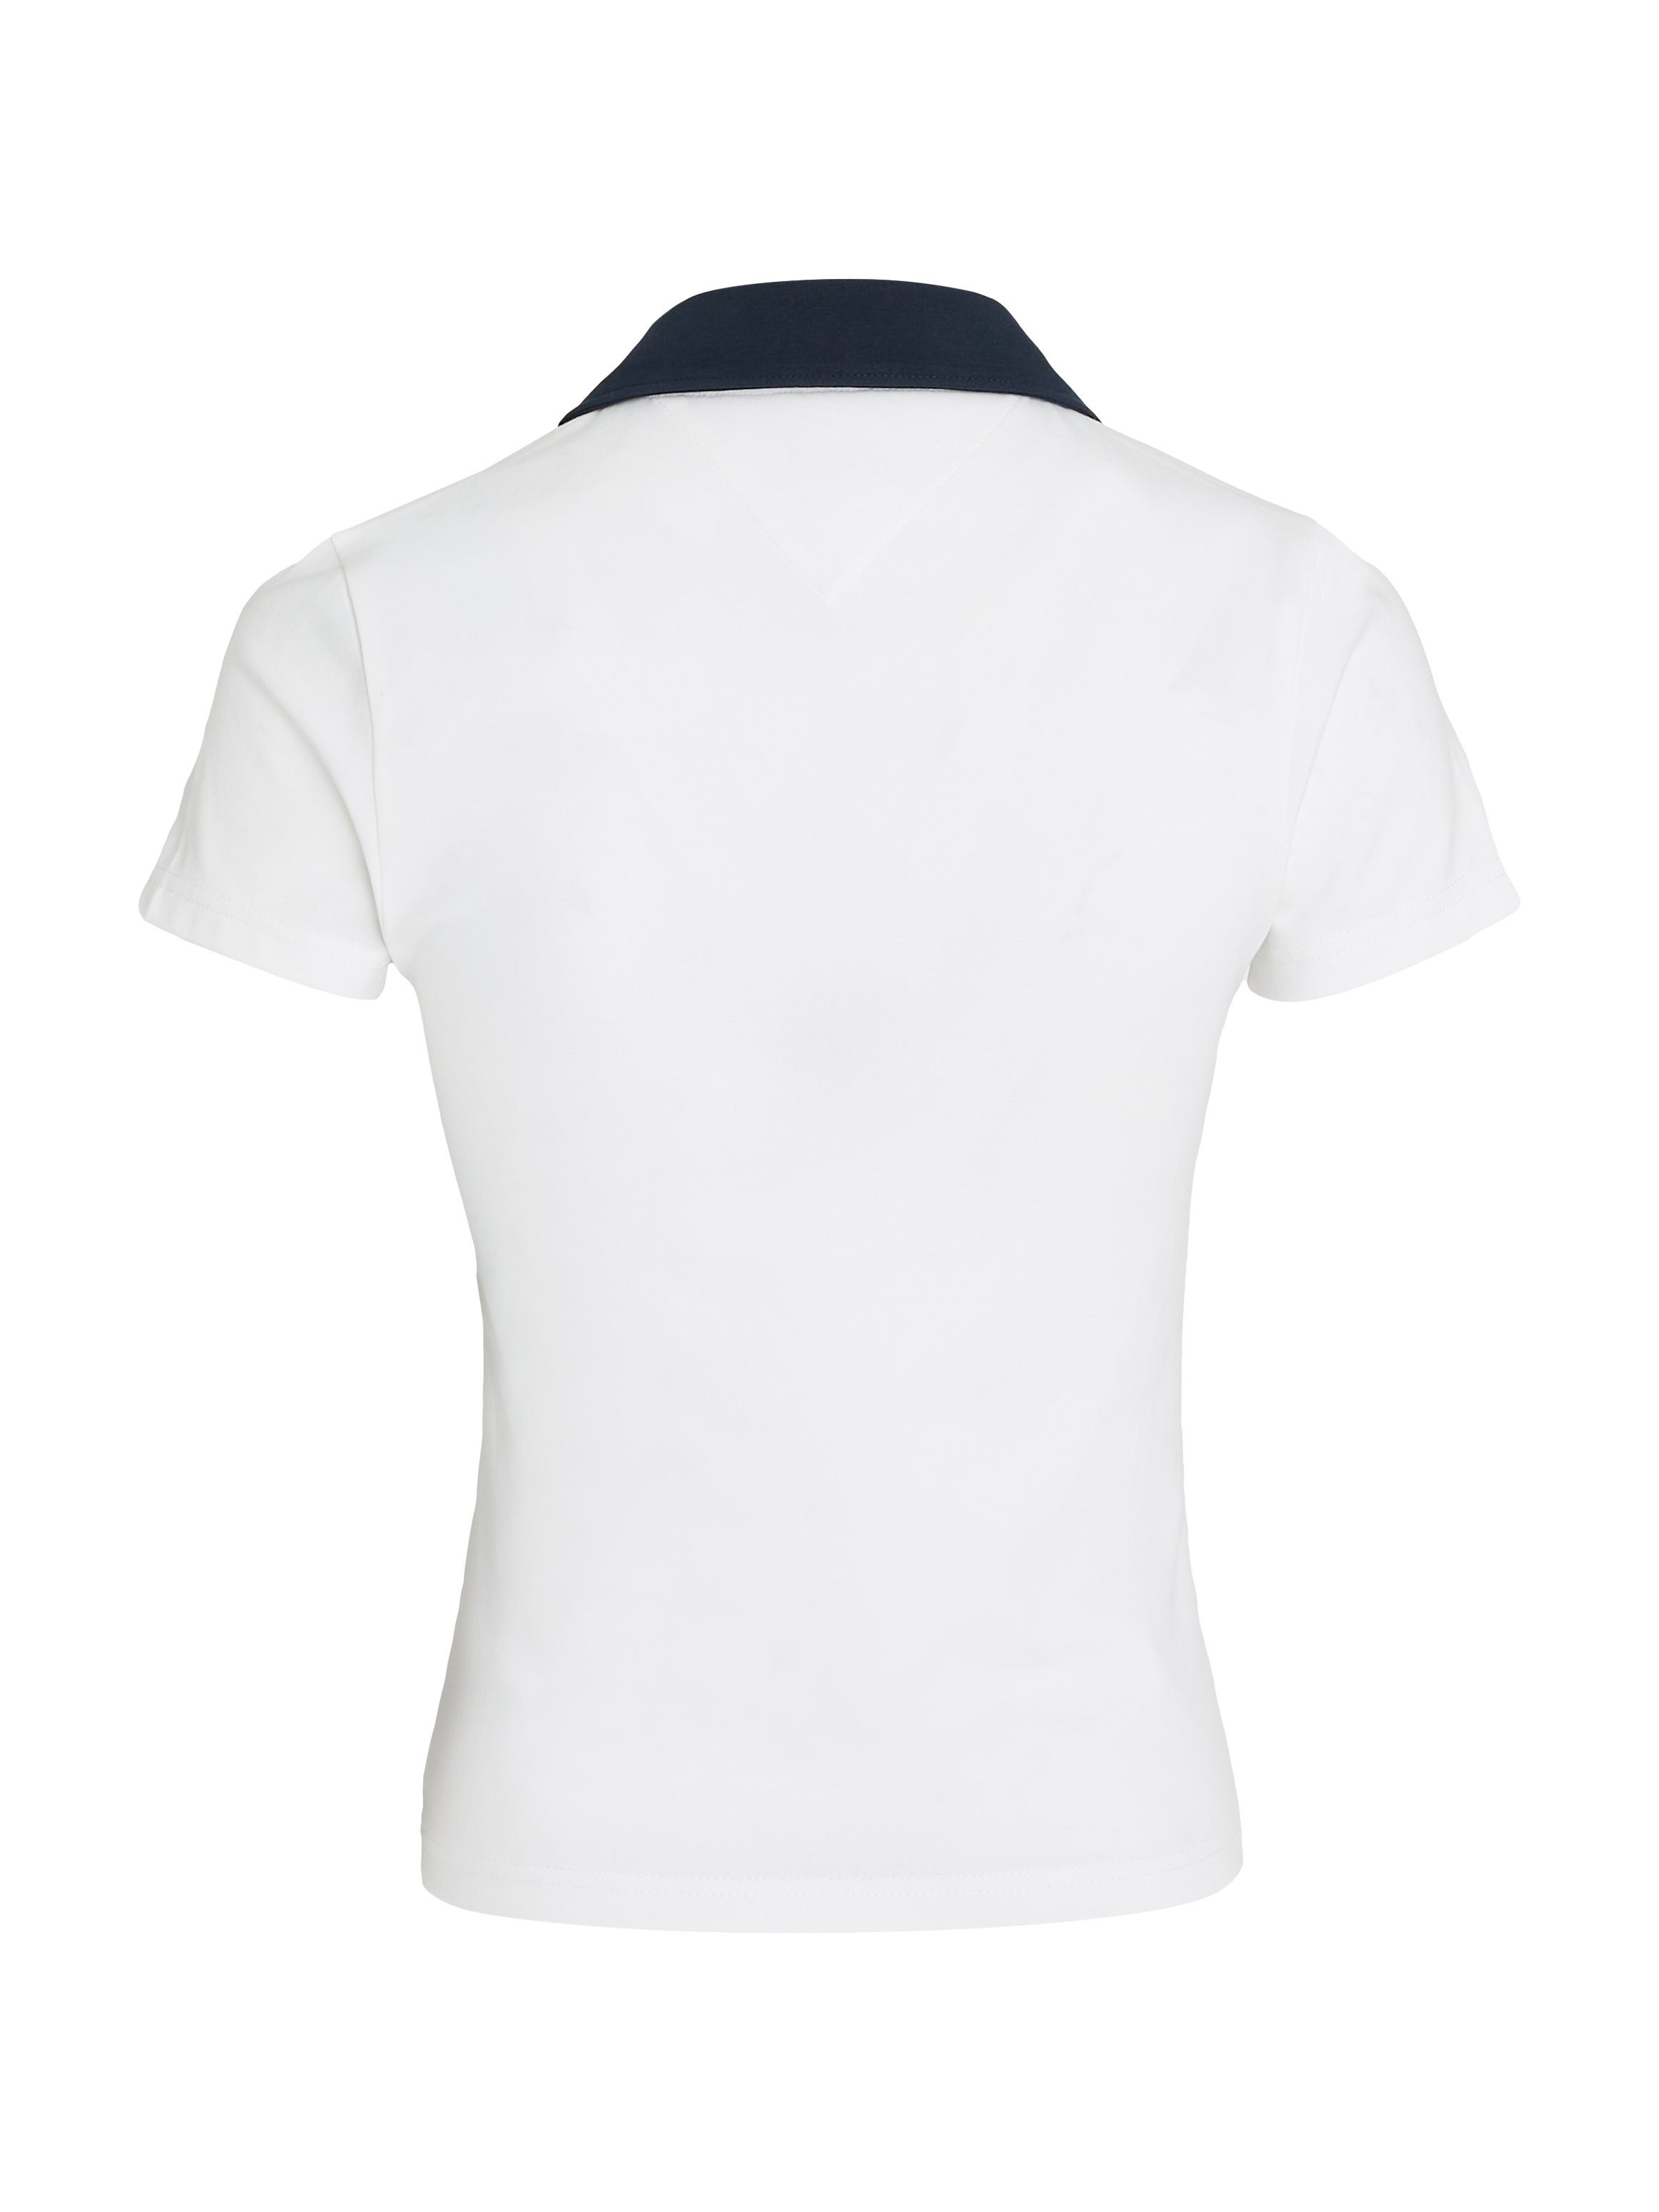 TOMMY JEANS Poloshirt